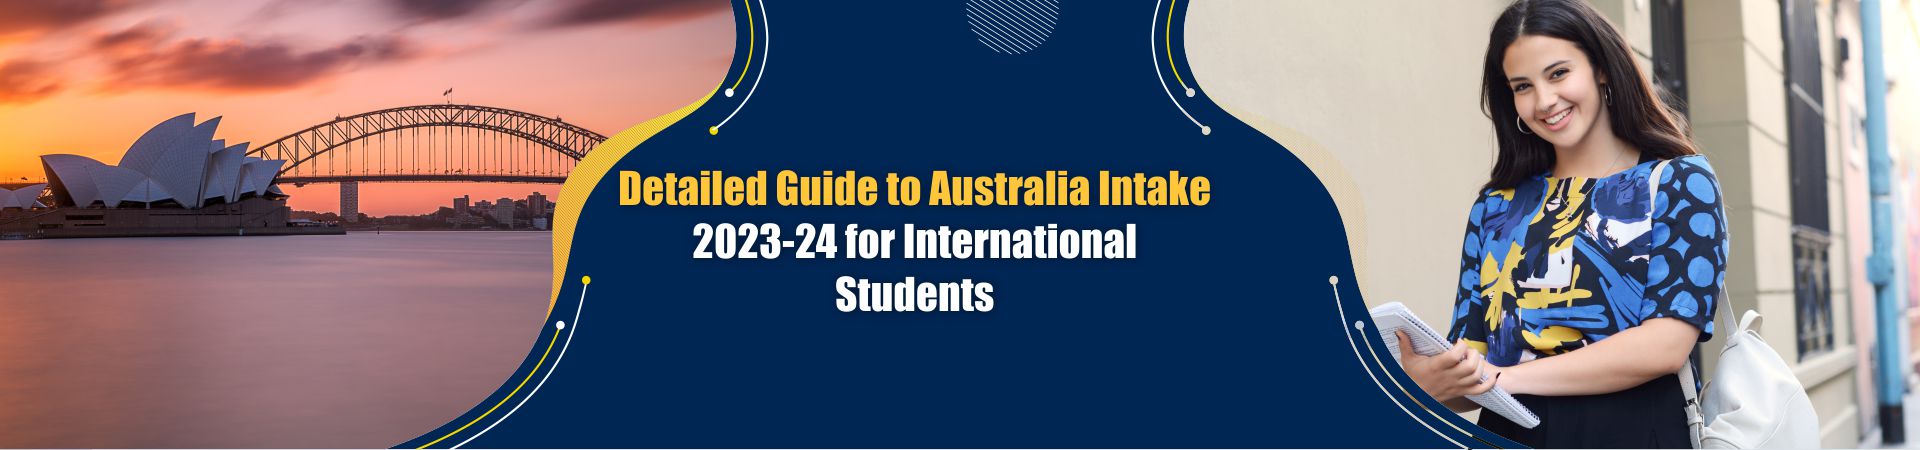 Intakes in Australia: Detailed Guide to Australia Intake 2023-24 for International Students